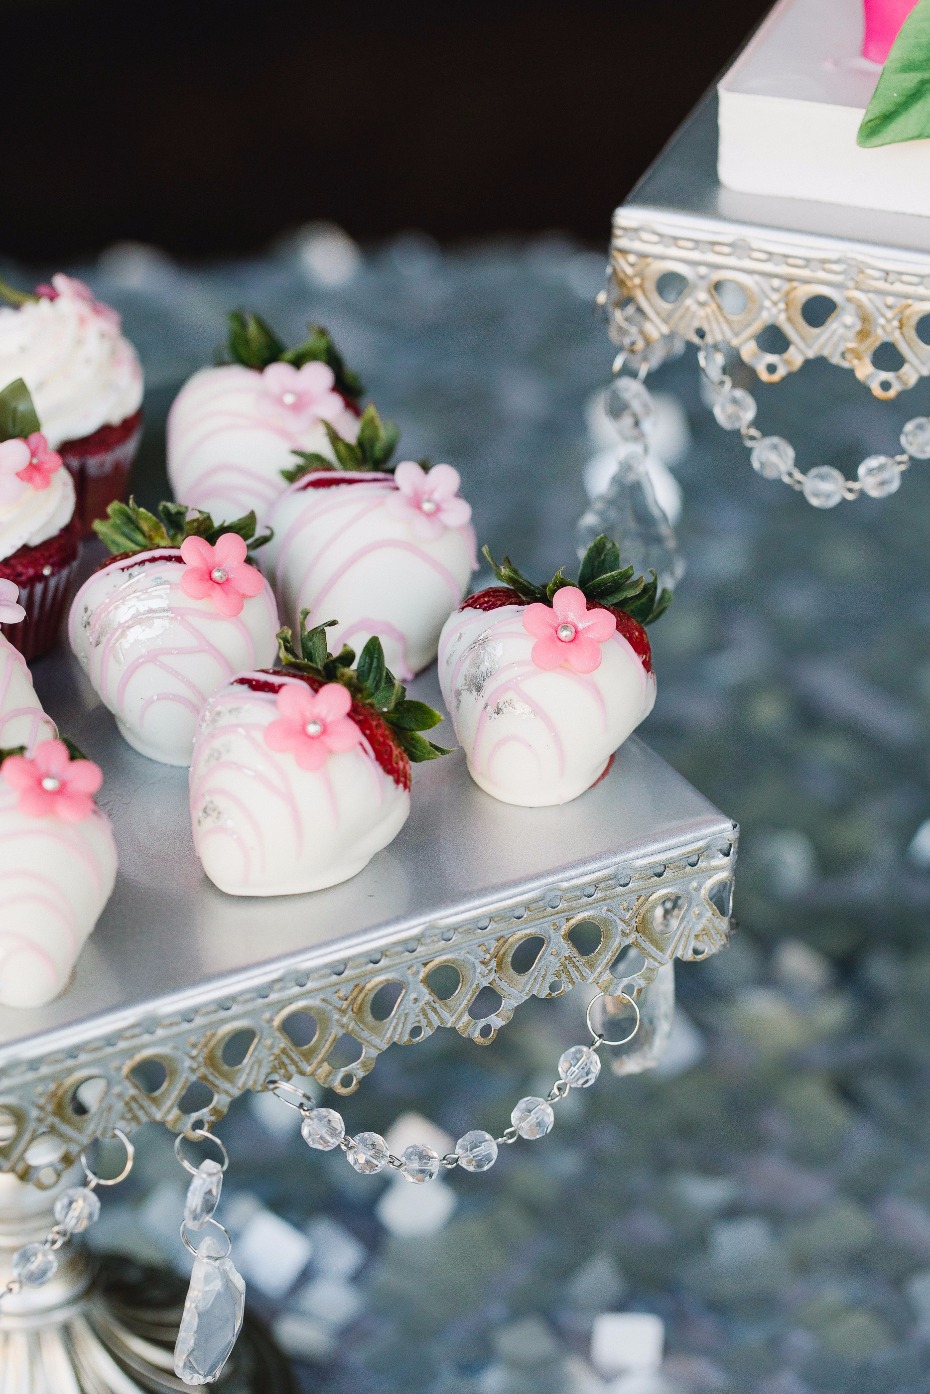 hand dipped strawberries on a vintage esque cake stand from Opulent Treasures